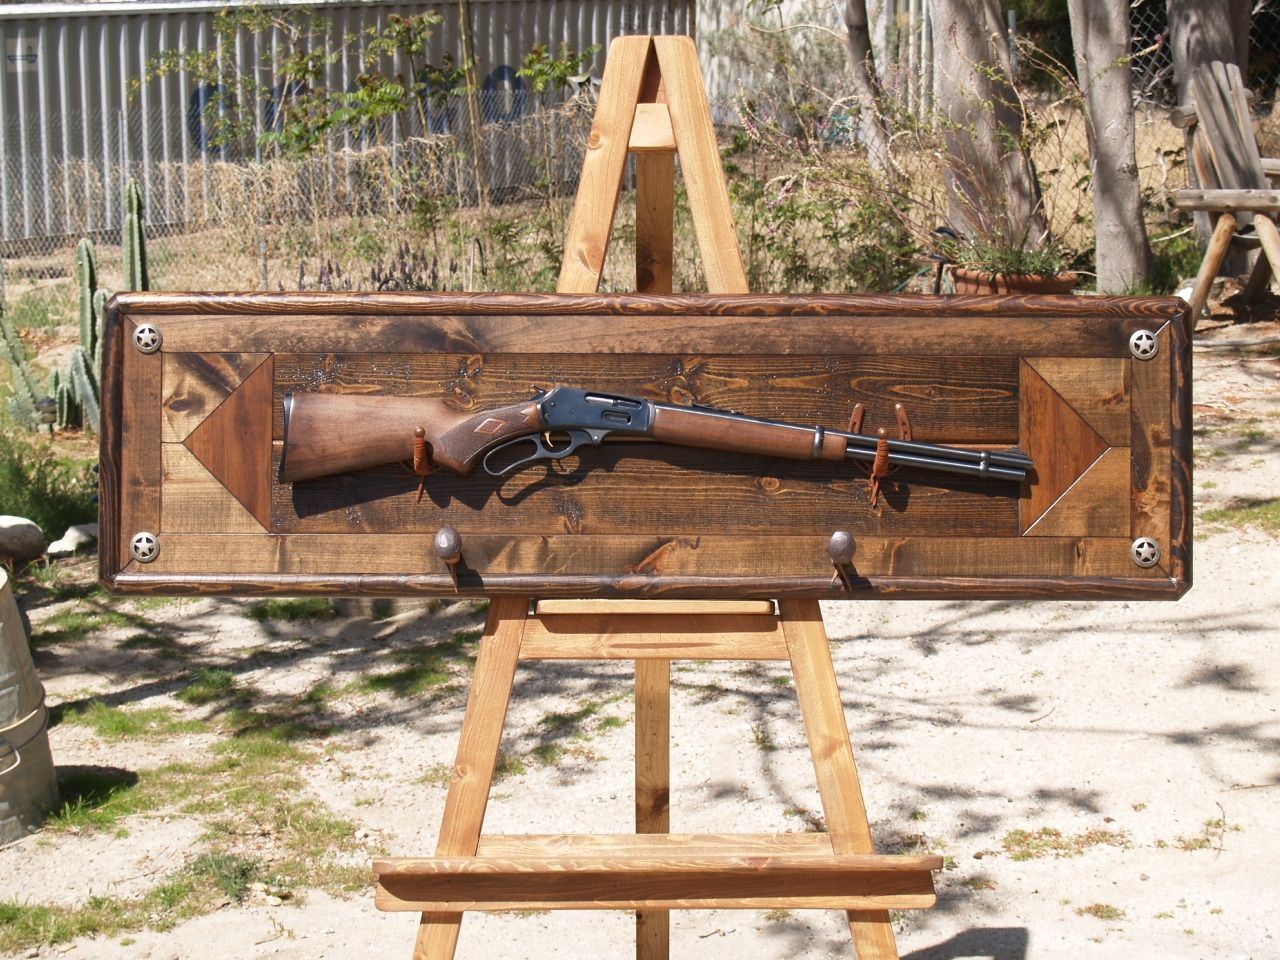 Hand Crafted Gun Rack By Art Of Wood | Free Download Nude Photo Gallery